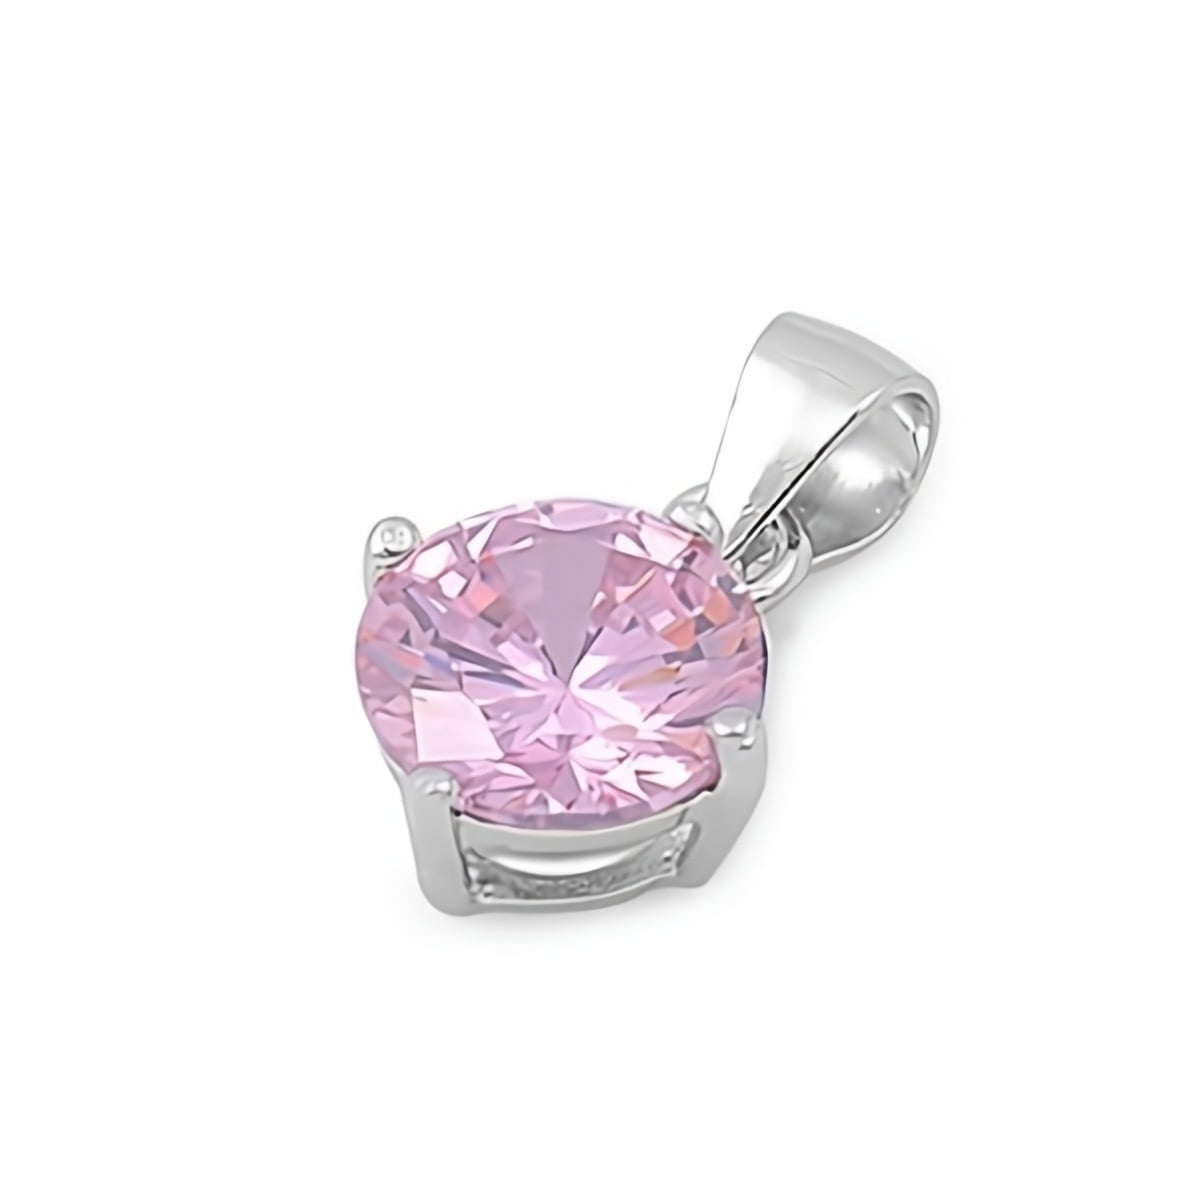 Pink CZ Glitzs Jewels 925 Sterling Silver Pendant and Earrings Jewelry Gift Set for Women